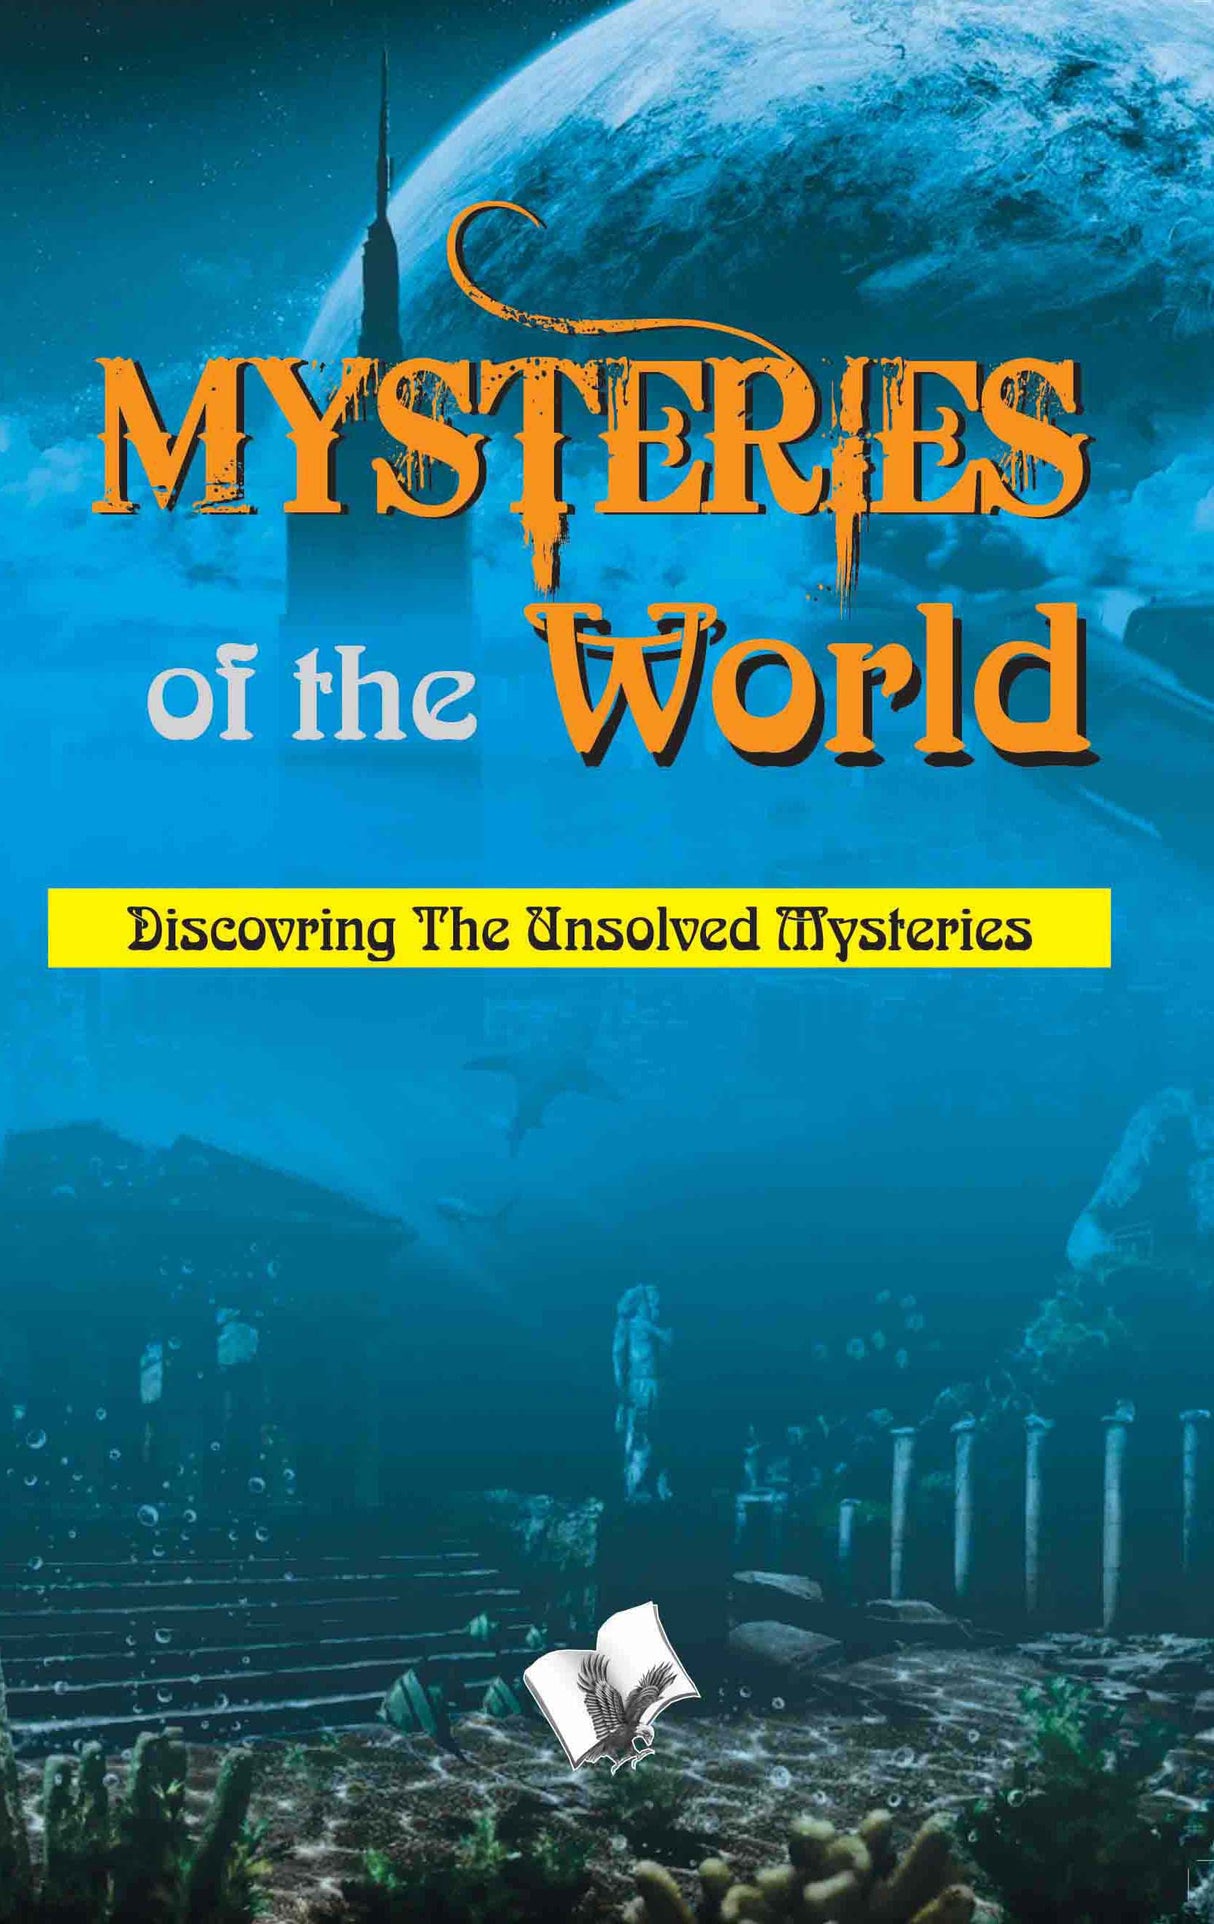 Mysteries of the world: Discovering the unsolved mysteries of the world